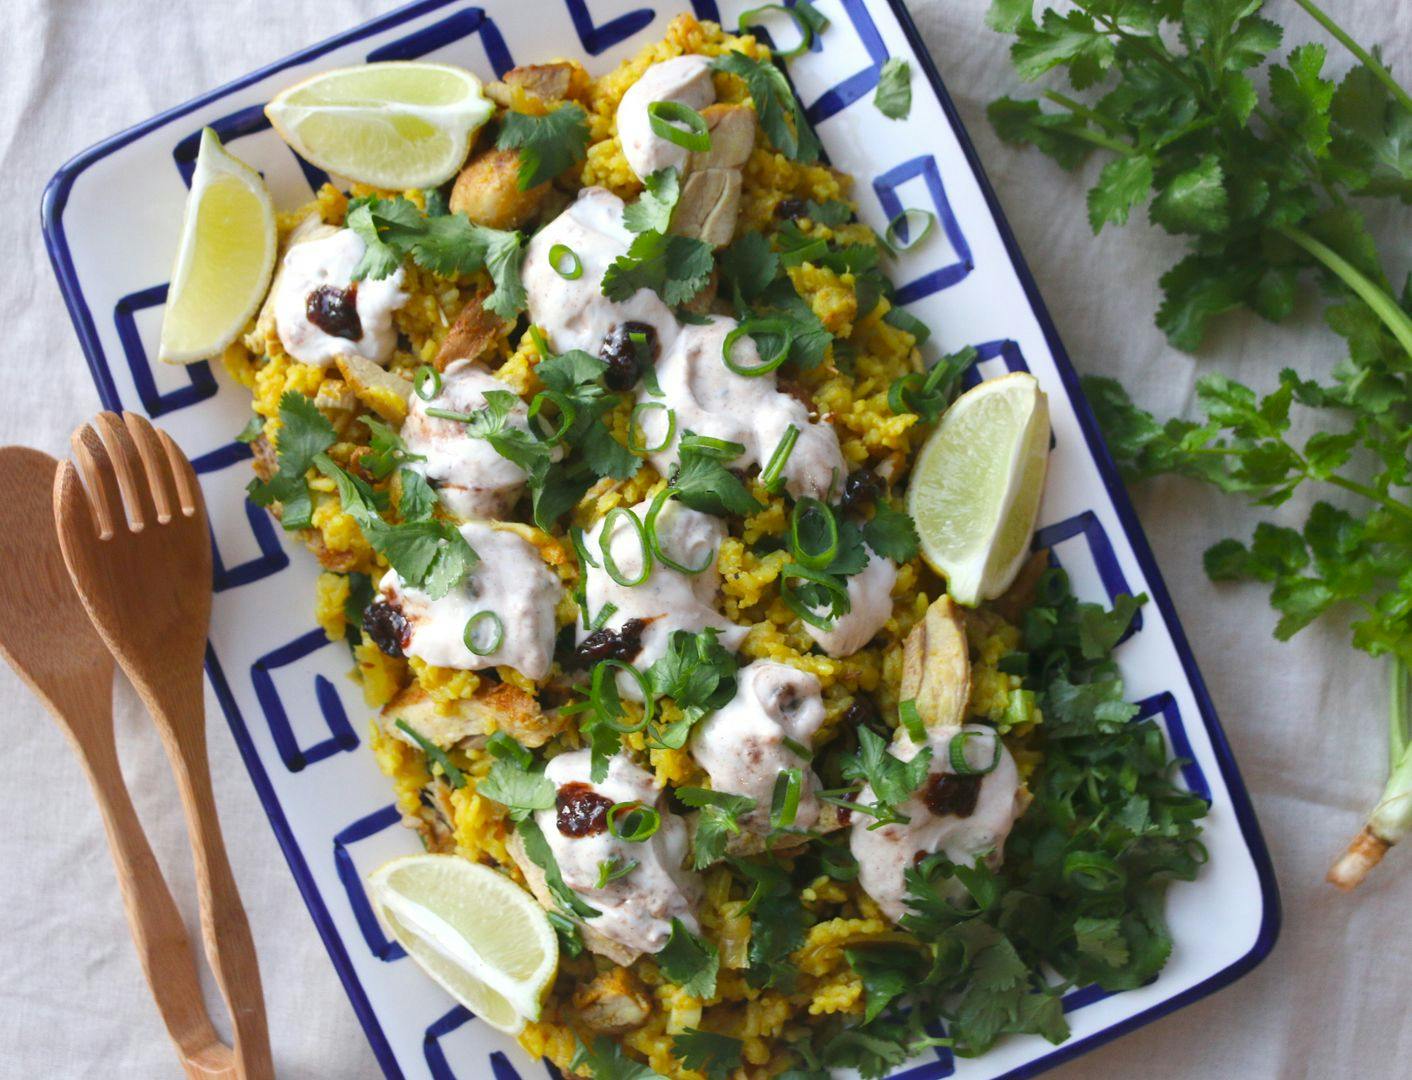 Spiced chicken pilaf with sour date yoghurt